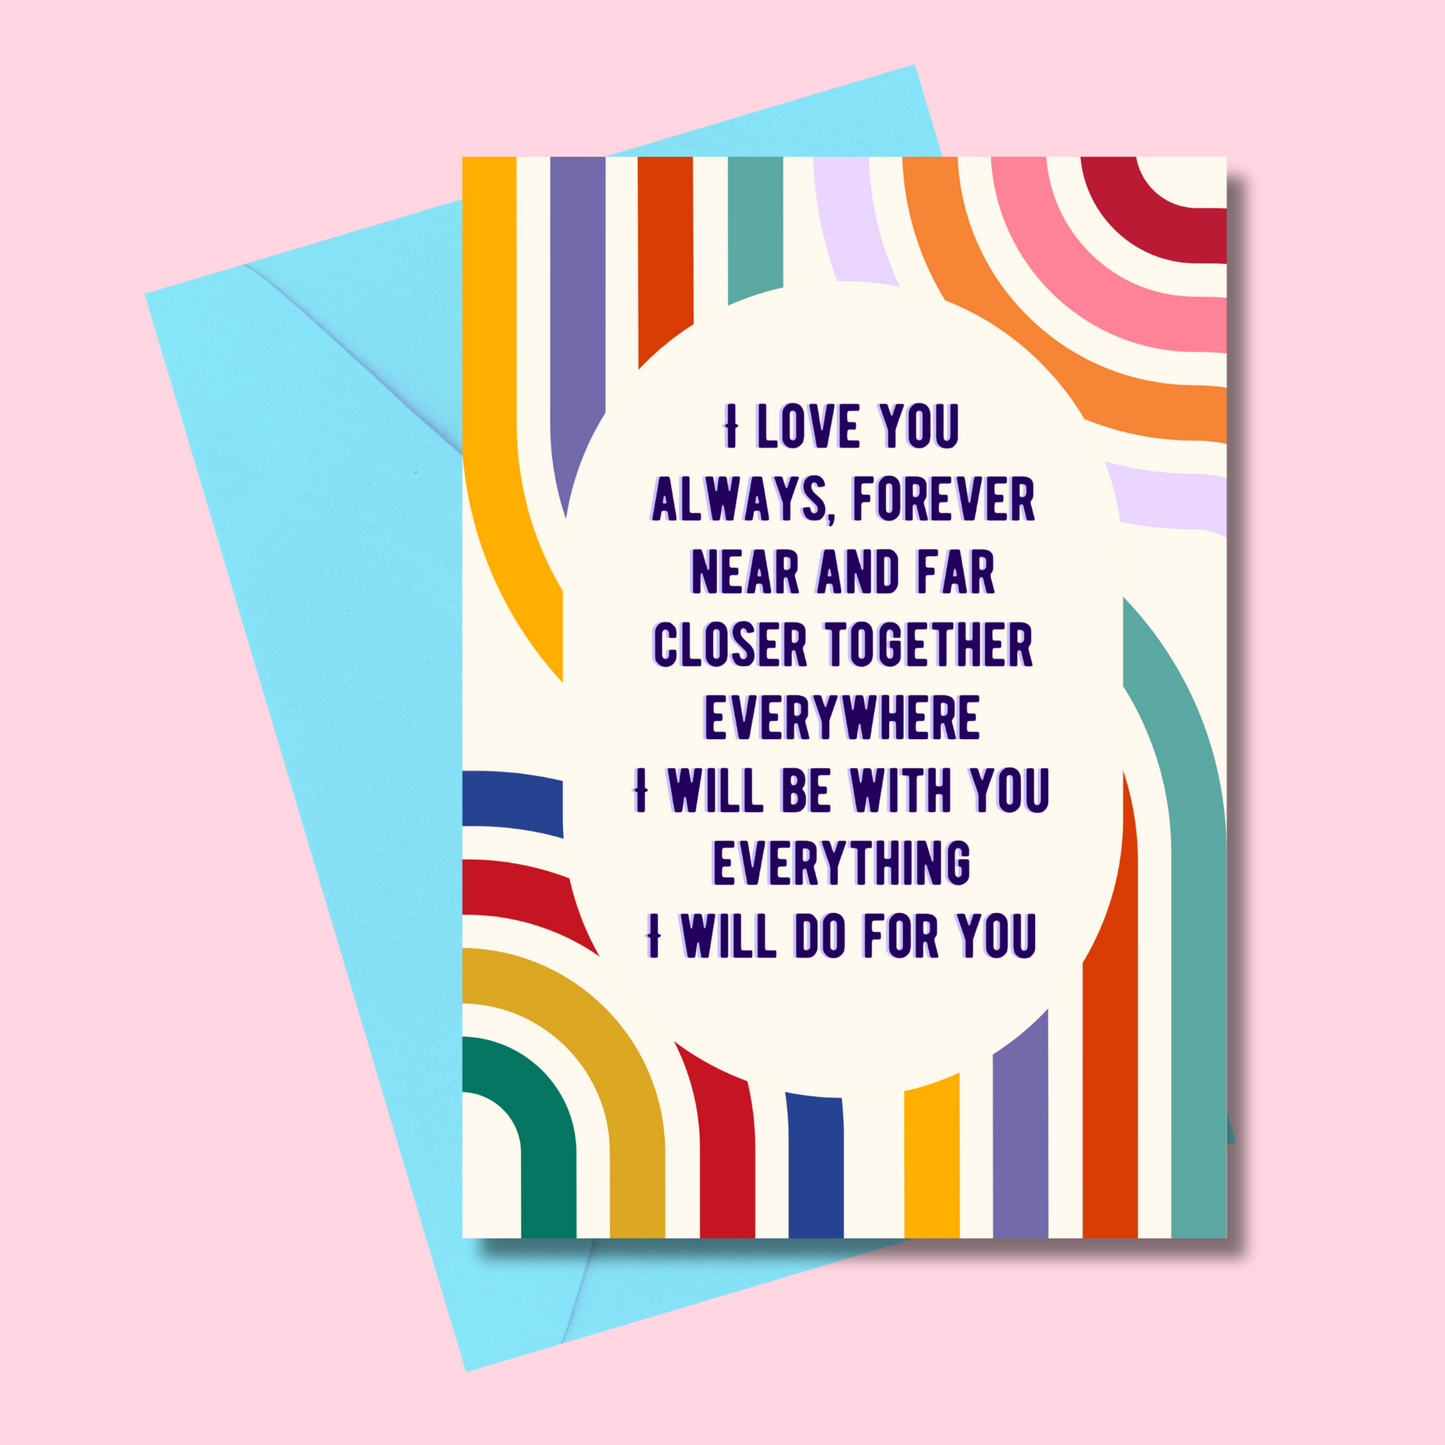 I love you, always forever... (5x7” print/card)